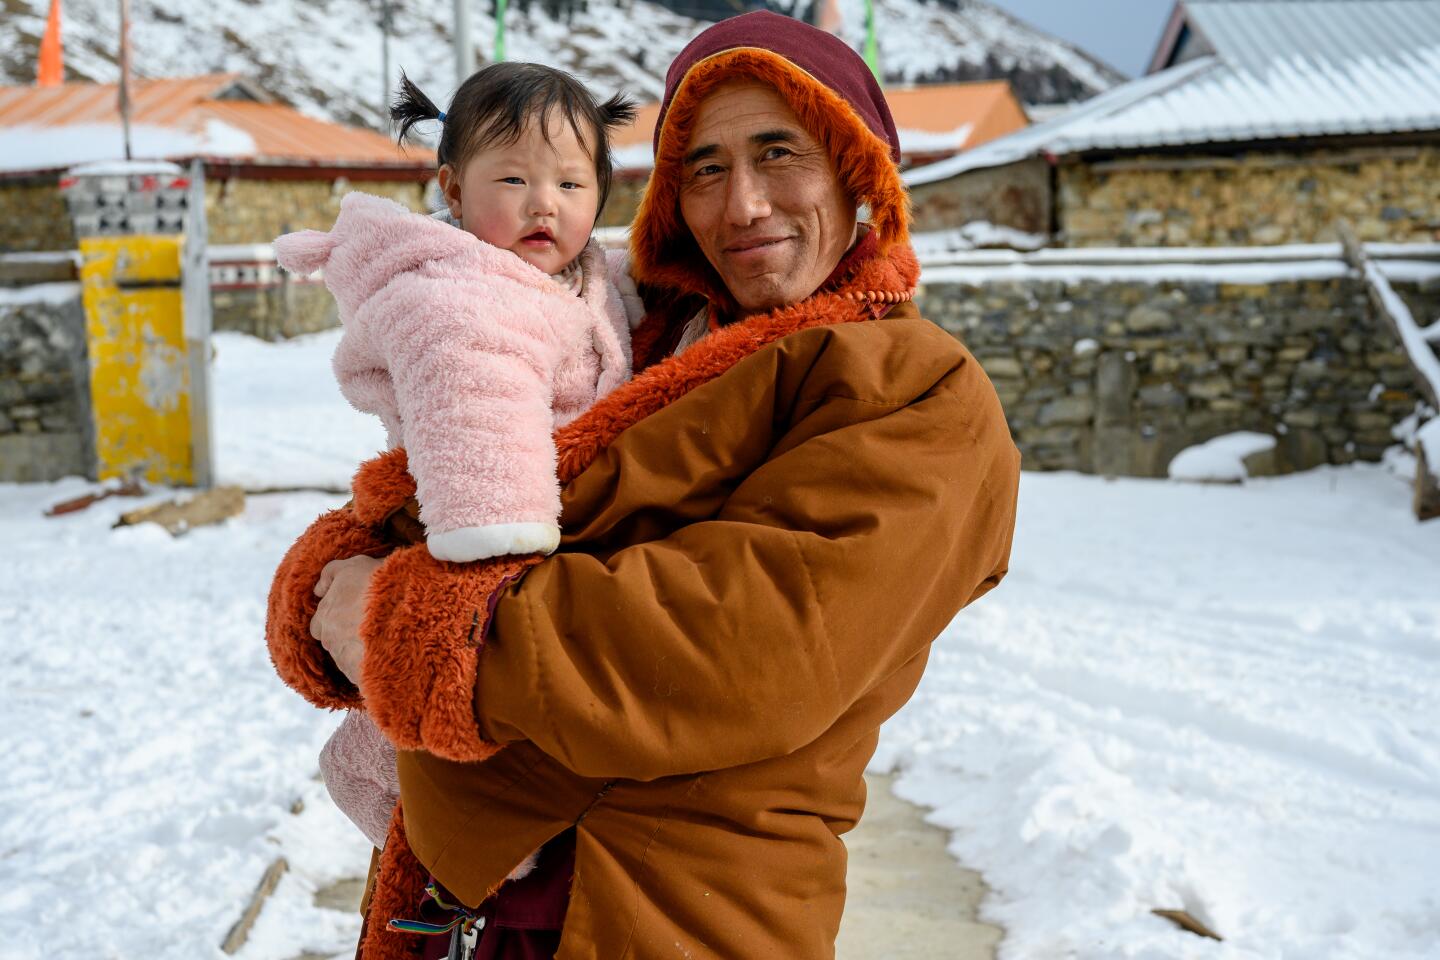 My Tibetan friend's uncle, a yak herder, holding his niece. He had returned to his home village in Garze for Losar, the Tibetan New Year, on Jan. 27, 2020.